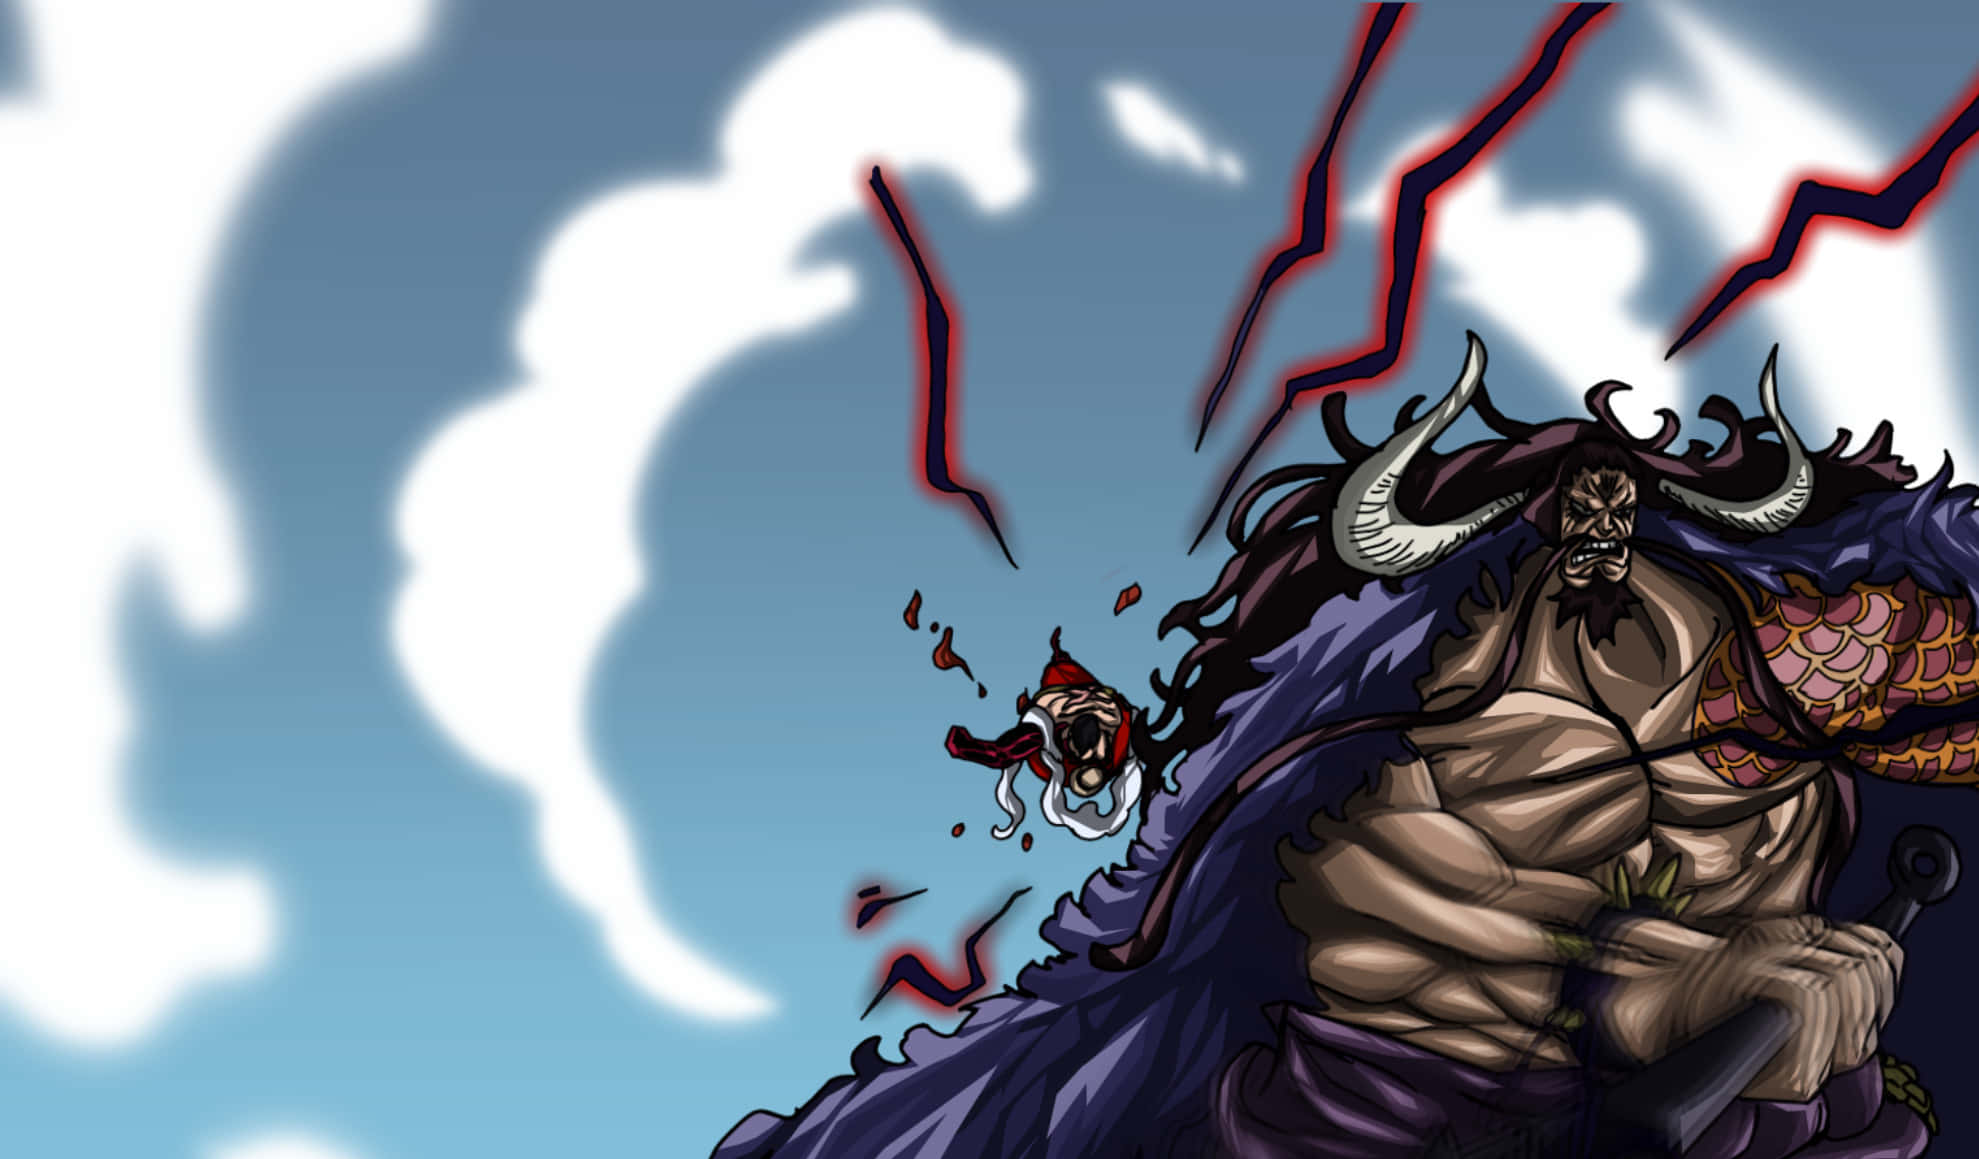 “kaido, A Powerful And Fearsome Warrior”